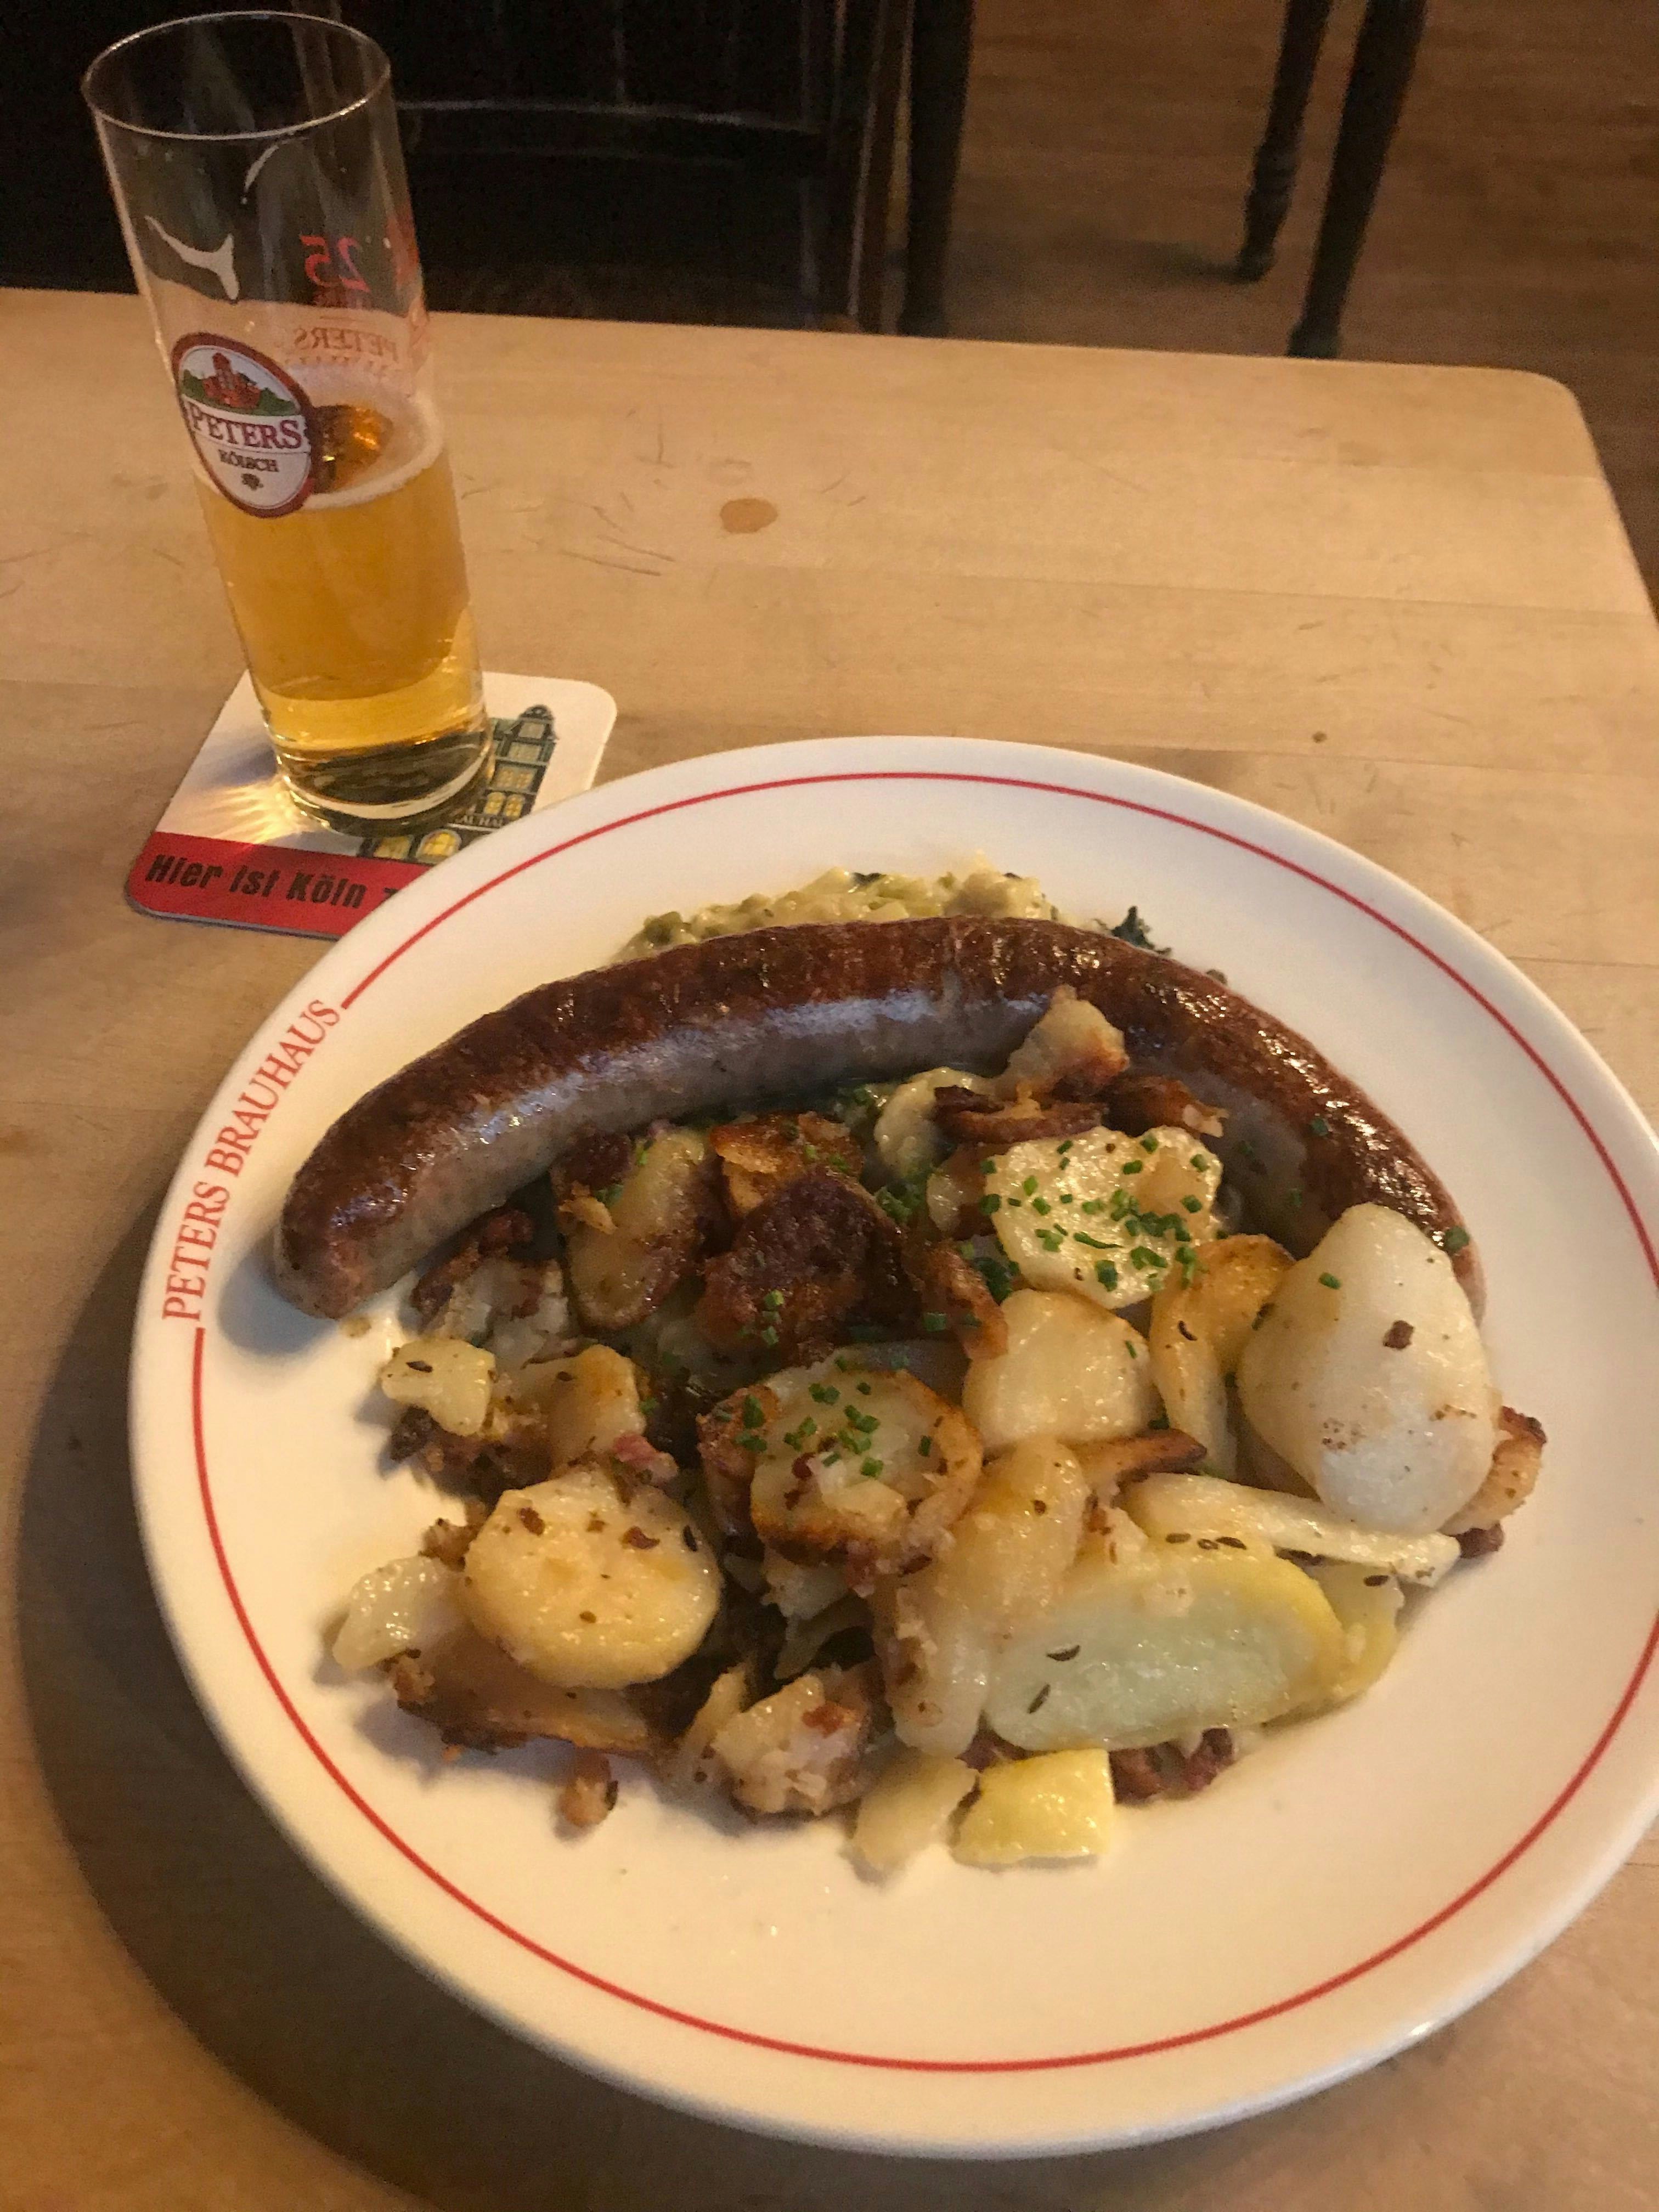 A sausage and fried potato on a plate with a small beer next to it.